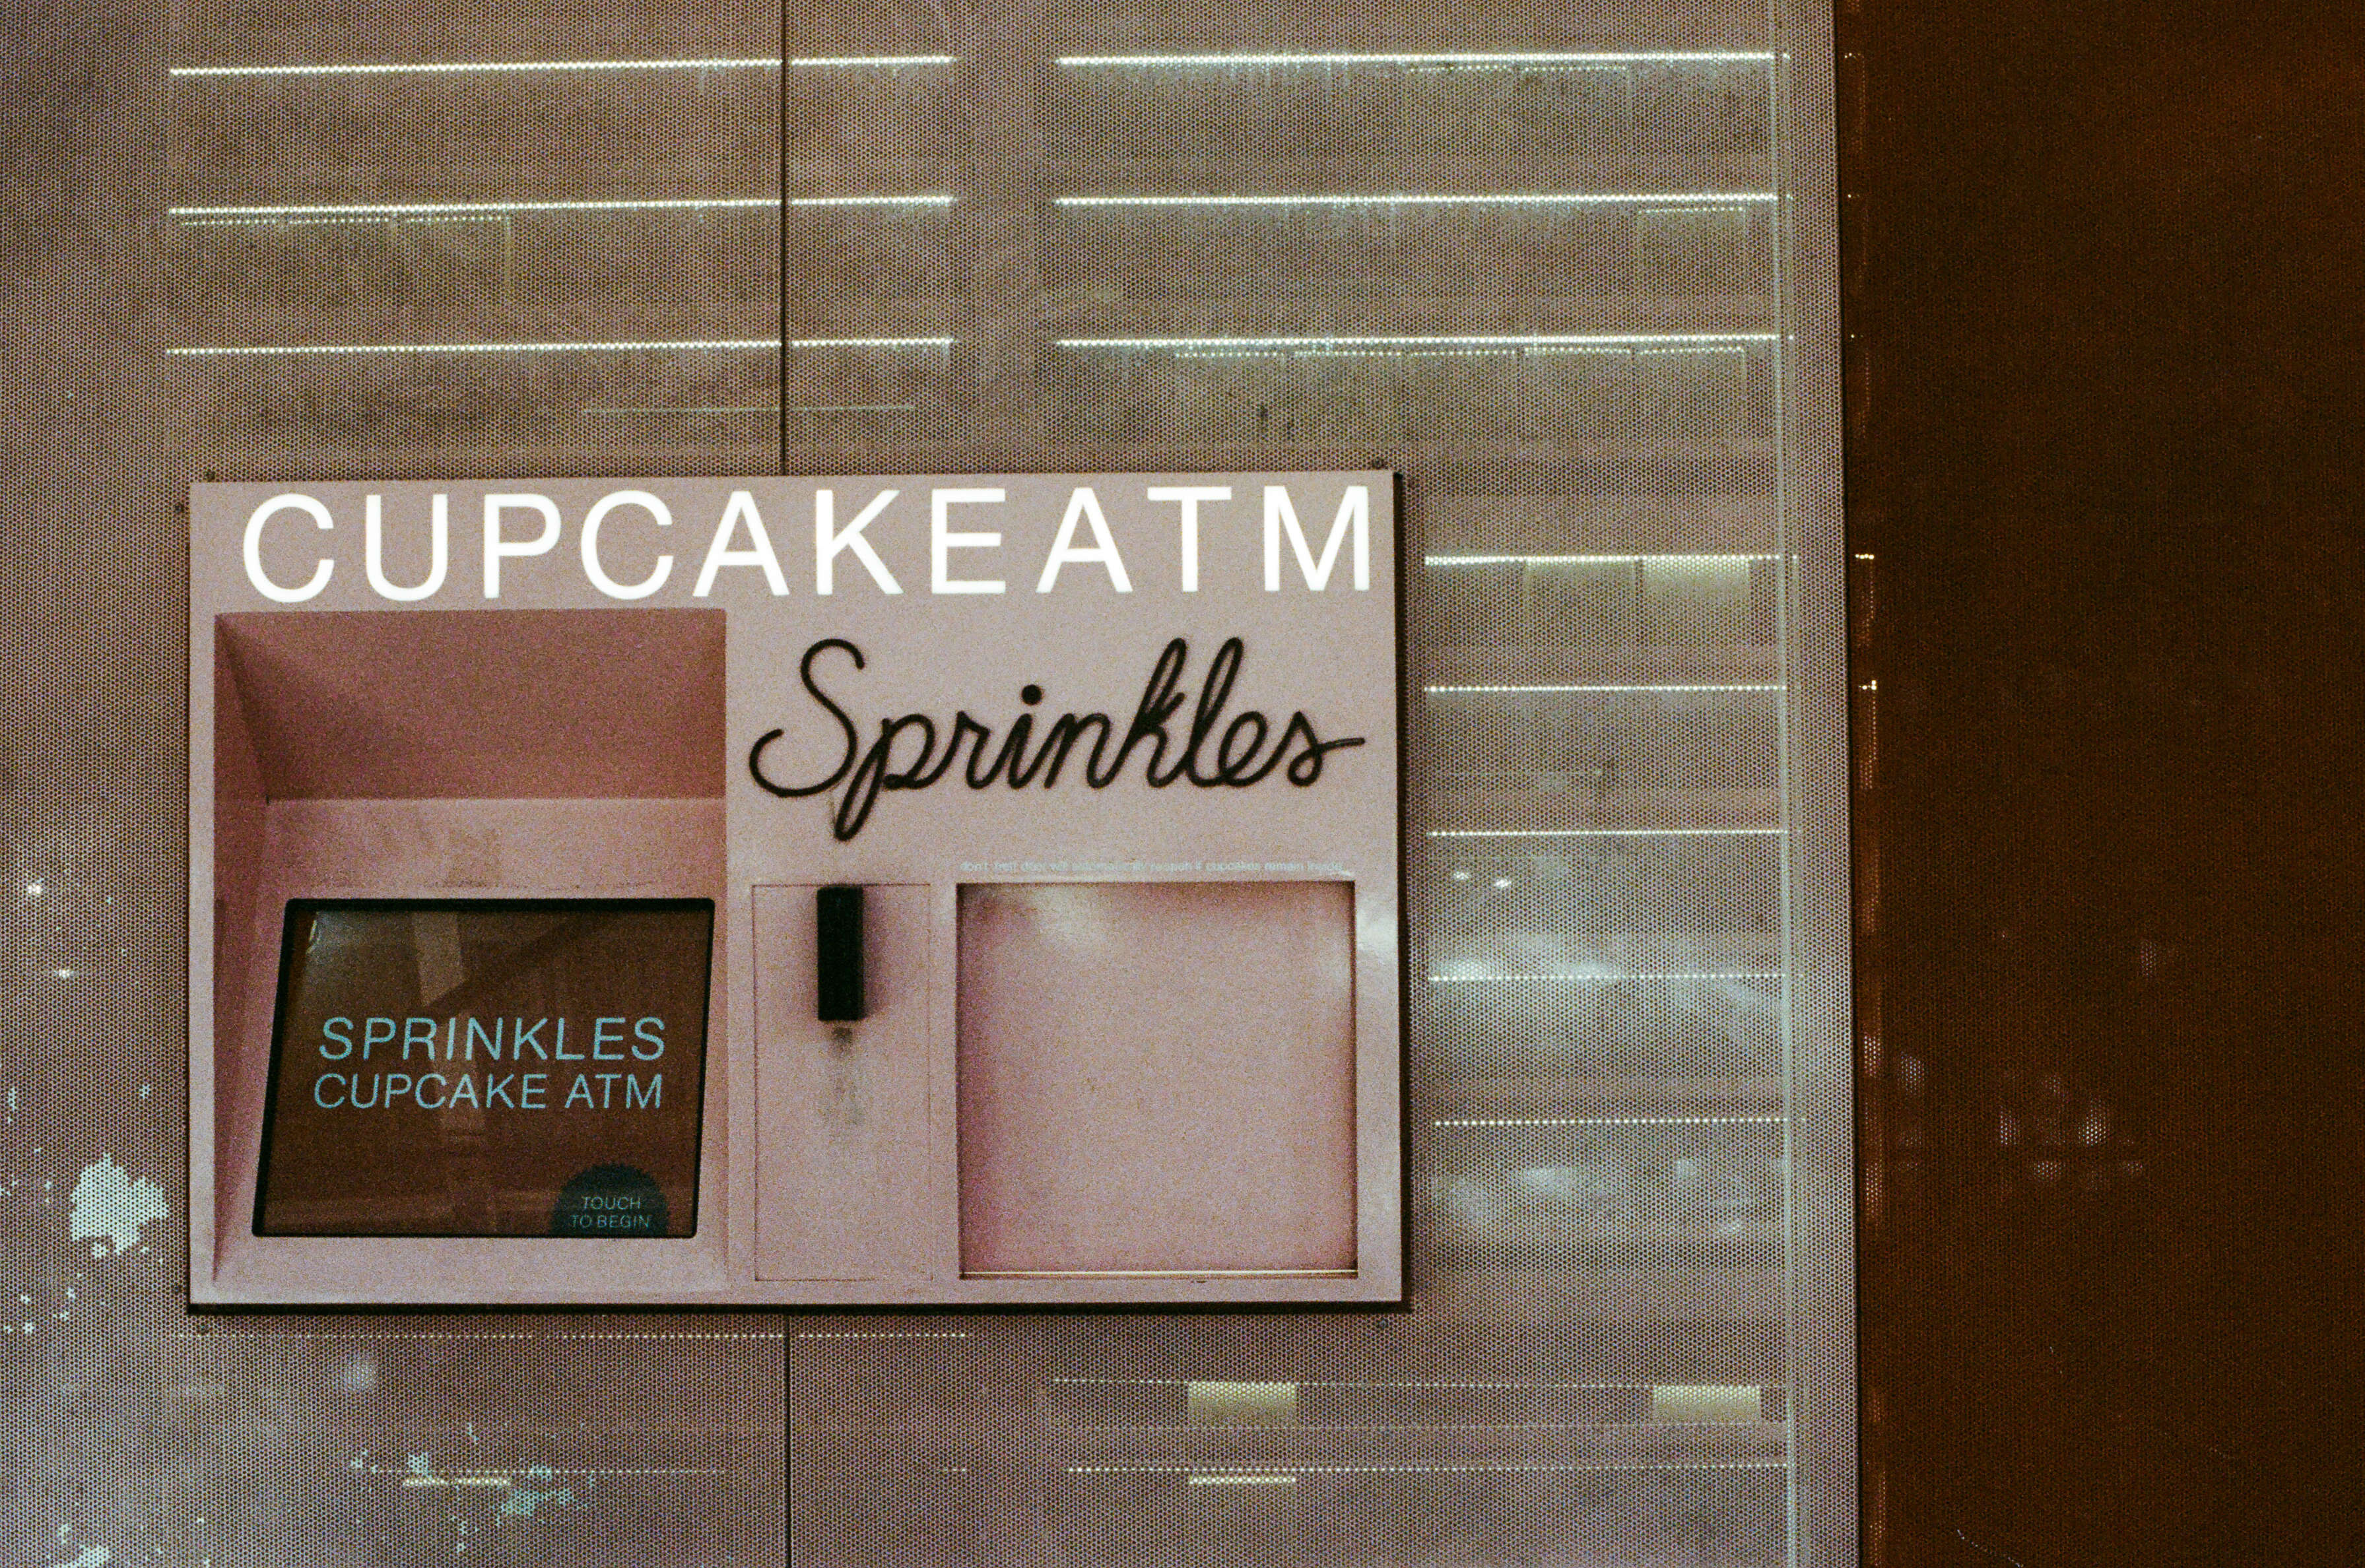 Cupcake ATM.
 - 61st and Lexington, NYC